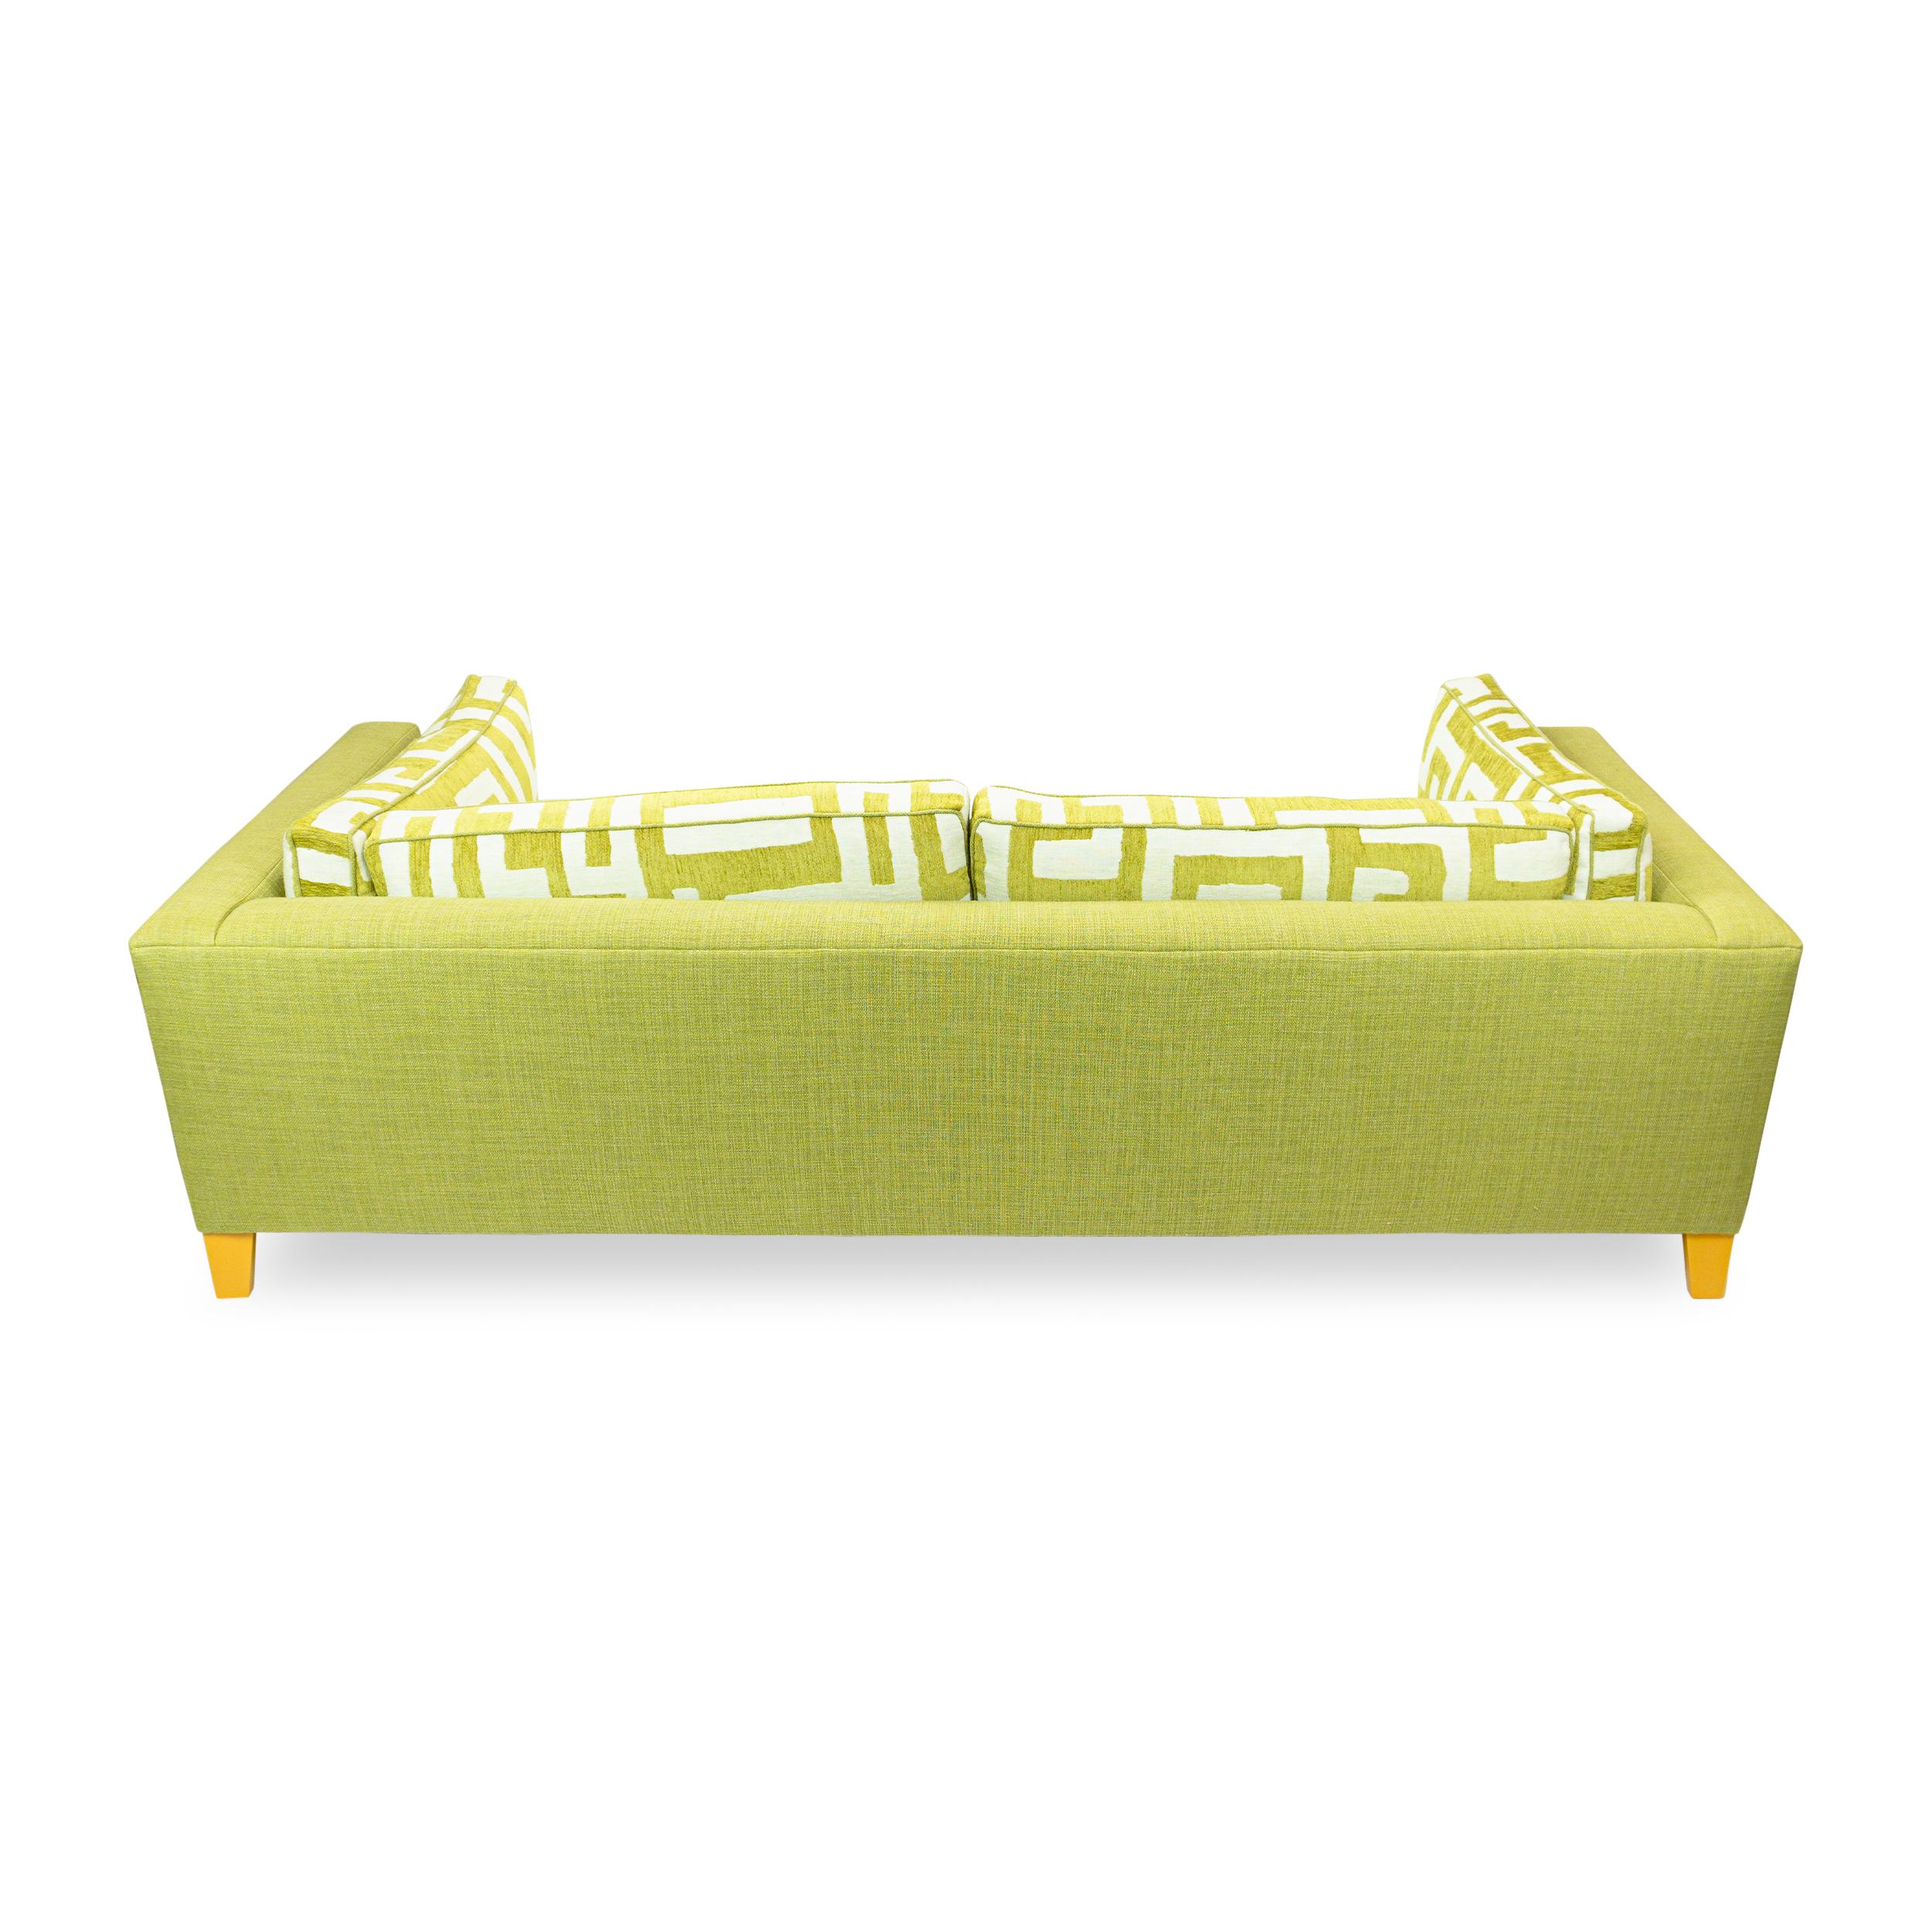 Lime Green Bench Cushion Sofa with Maze Pattern Cushions and Sunflower Feet For Sale 1